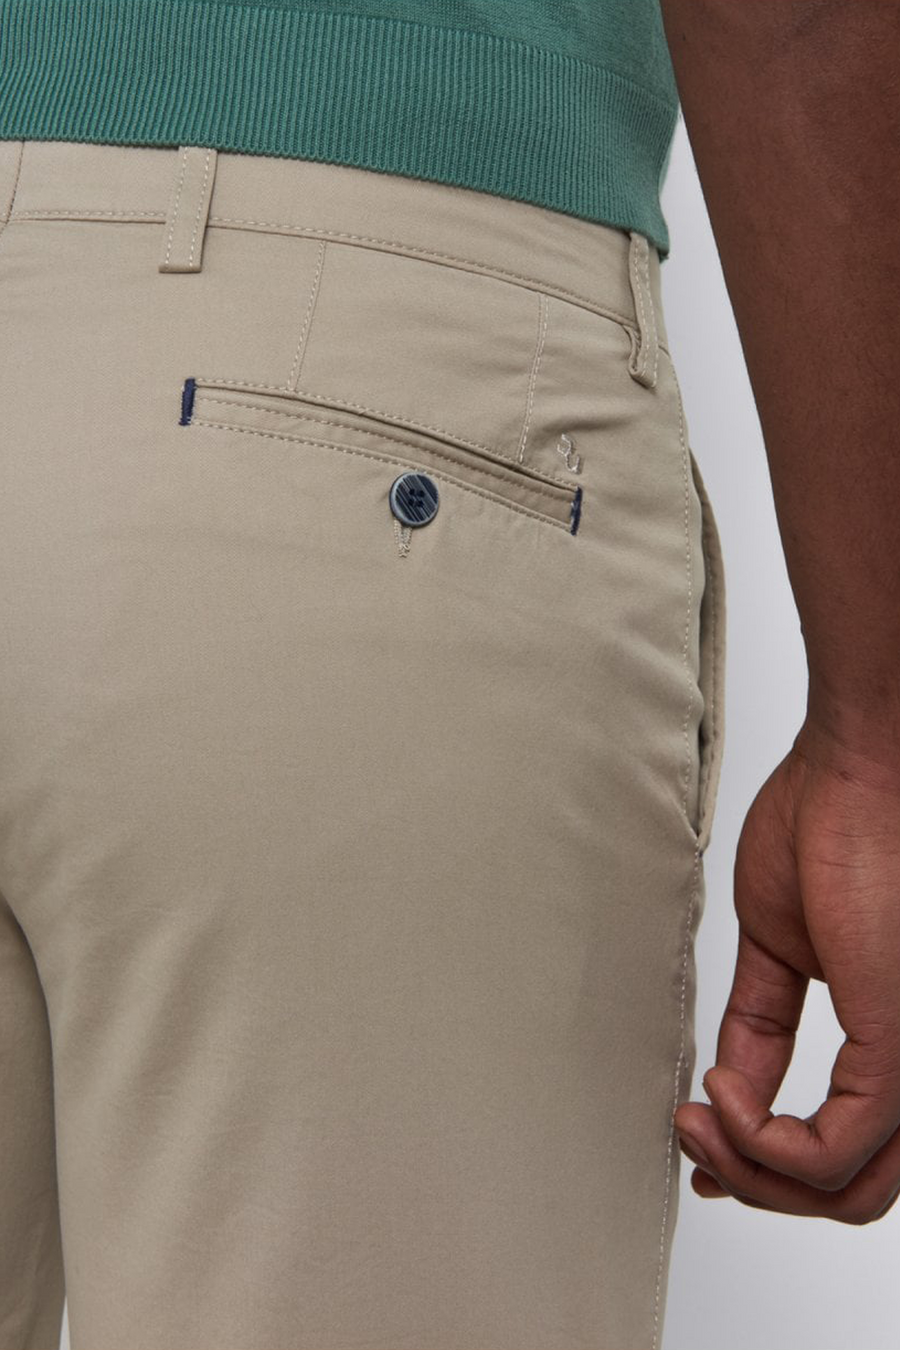 Buy the Remus Uomo Elio Chino Short Beige at Intro. Spend £50 for free UK delivery. Official stockists. We ship worldwide.